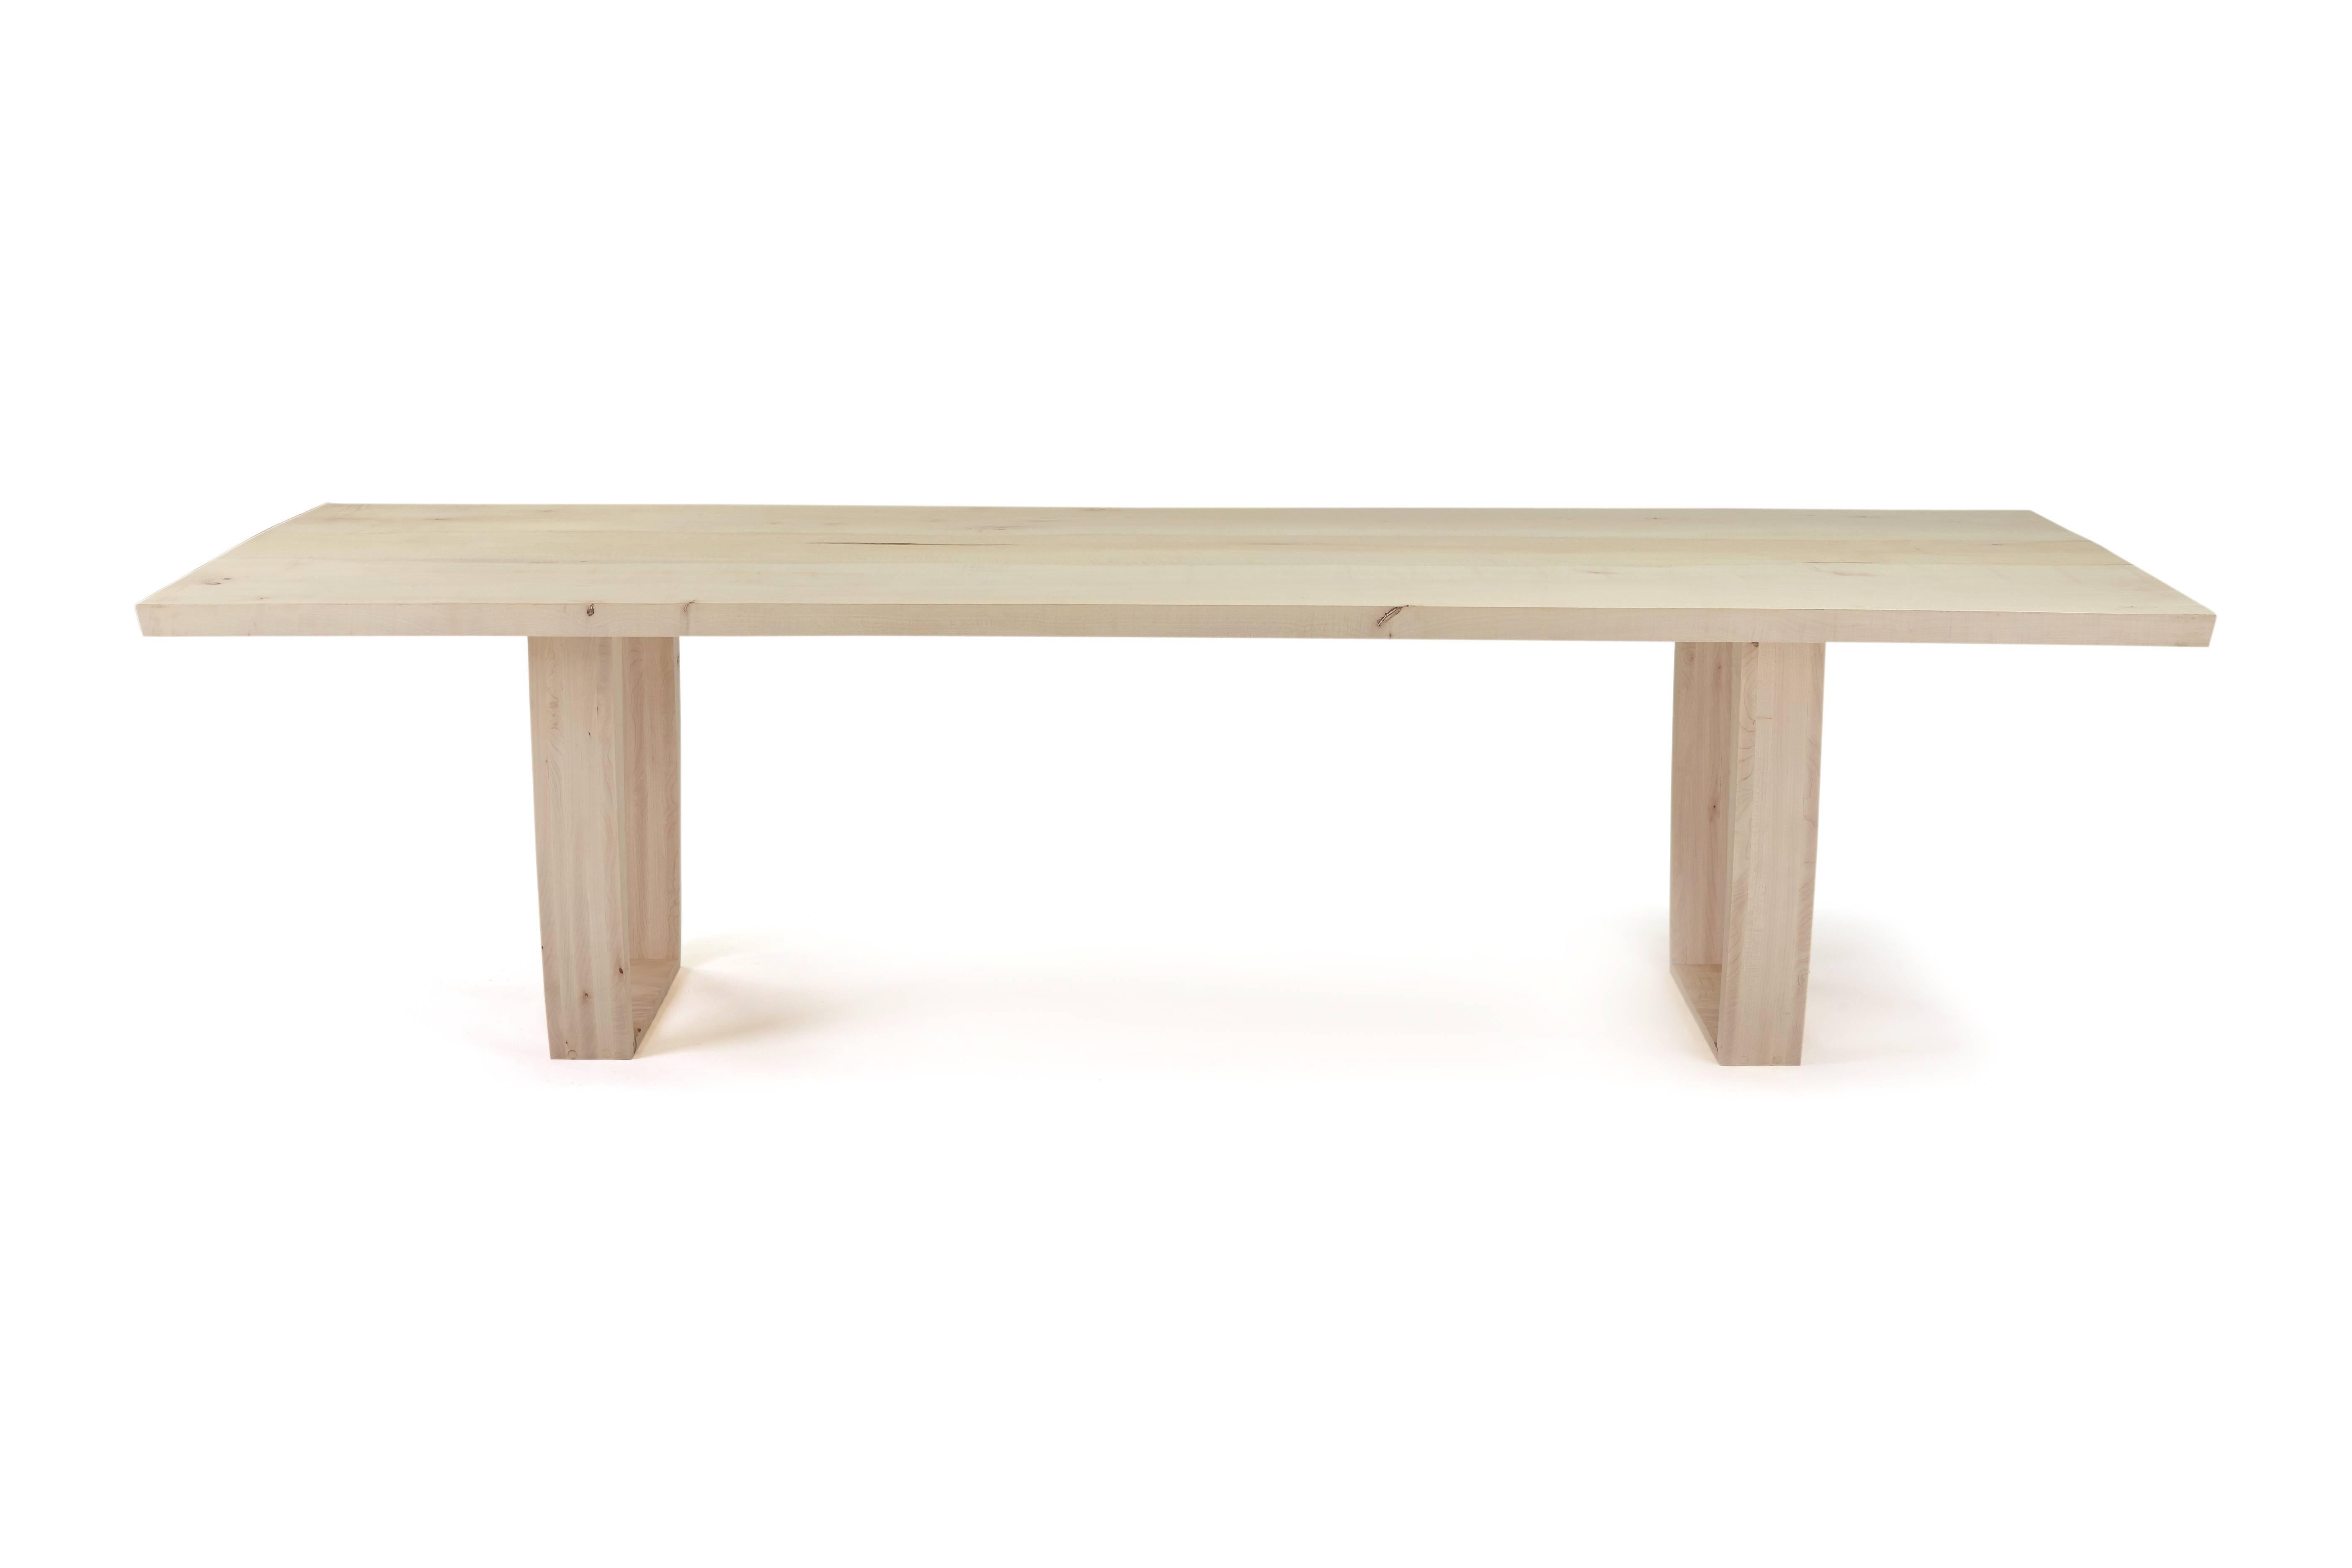 English sycamore table; 2012. Bleached to lighten the sycamore and given a protective white oil finish. Making number 98.
The top for this table was made as a promotional piece in 2012 for the Grand Designs Live, London exhibition. The leg were